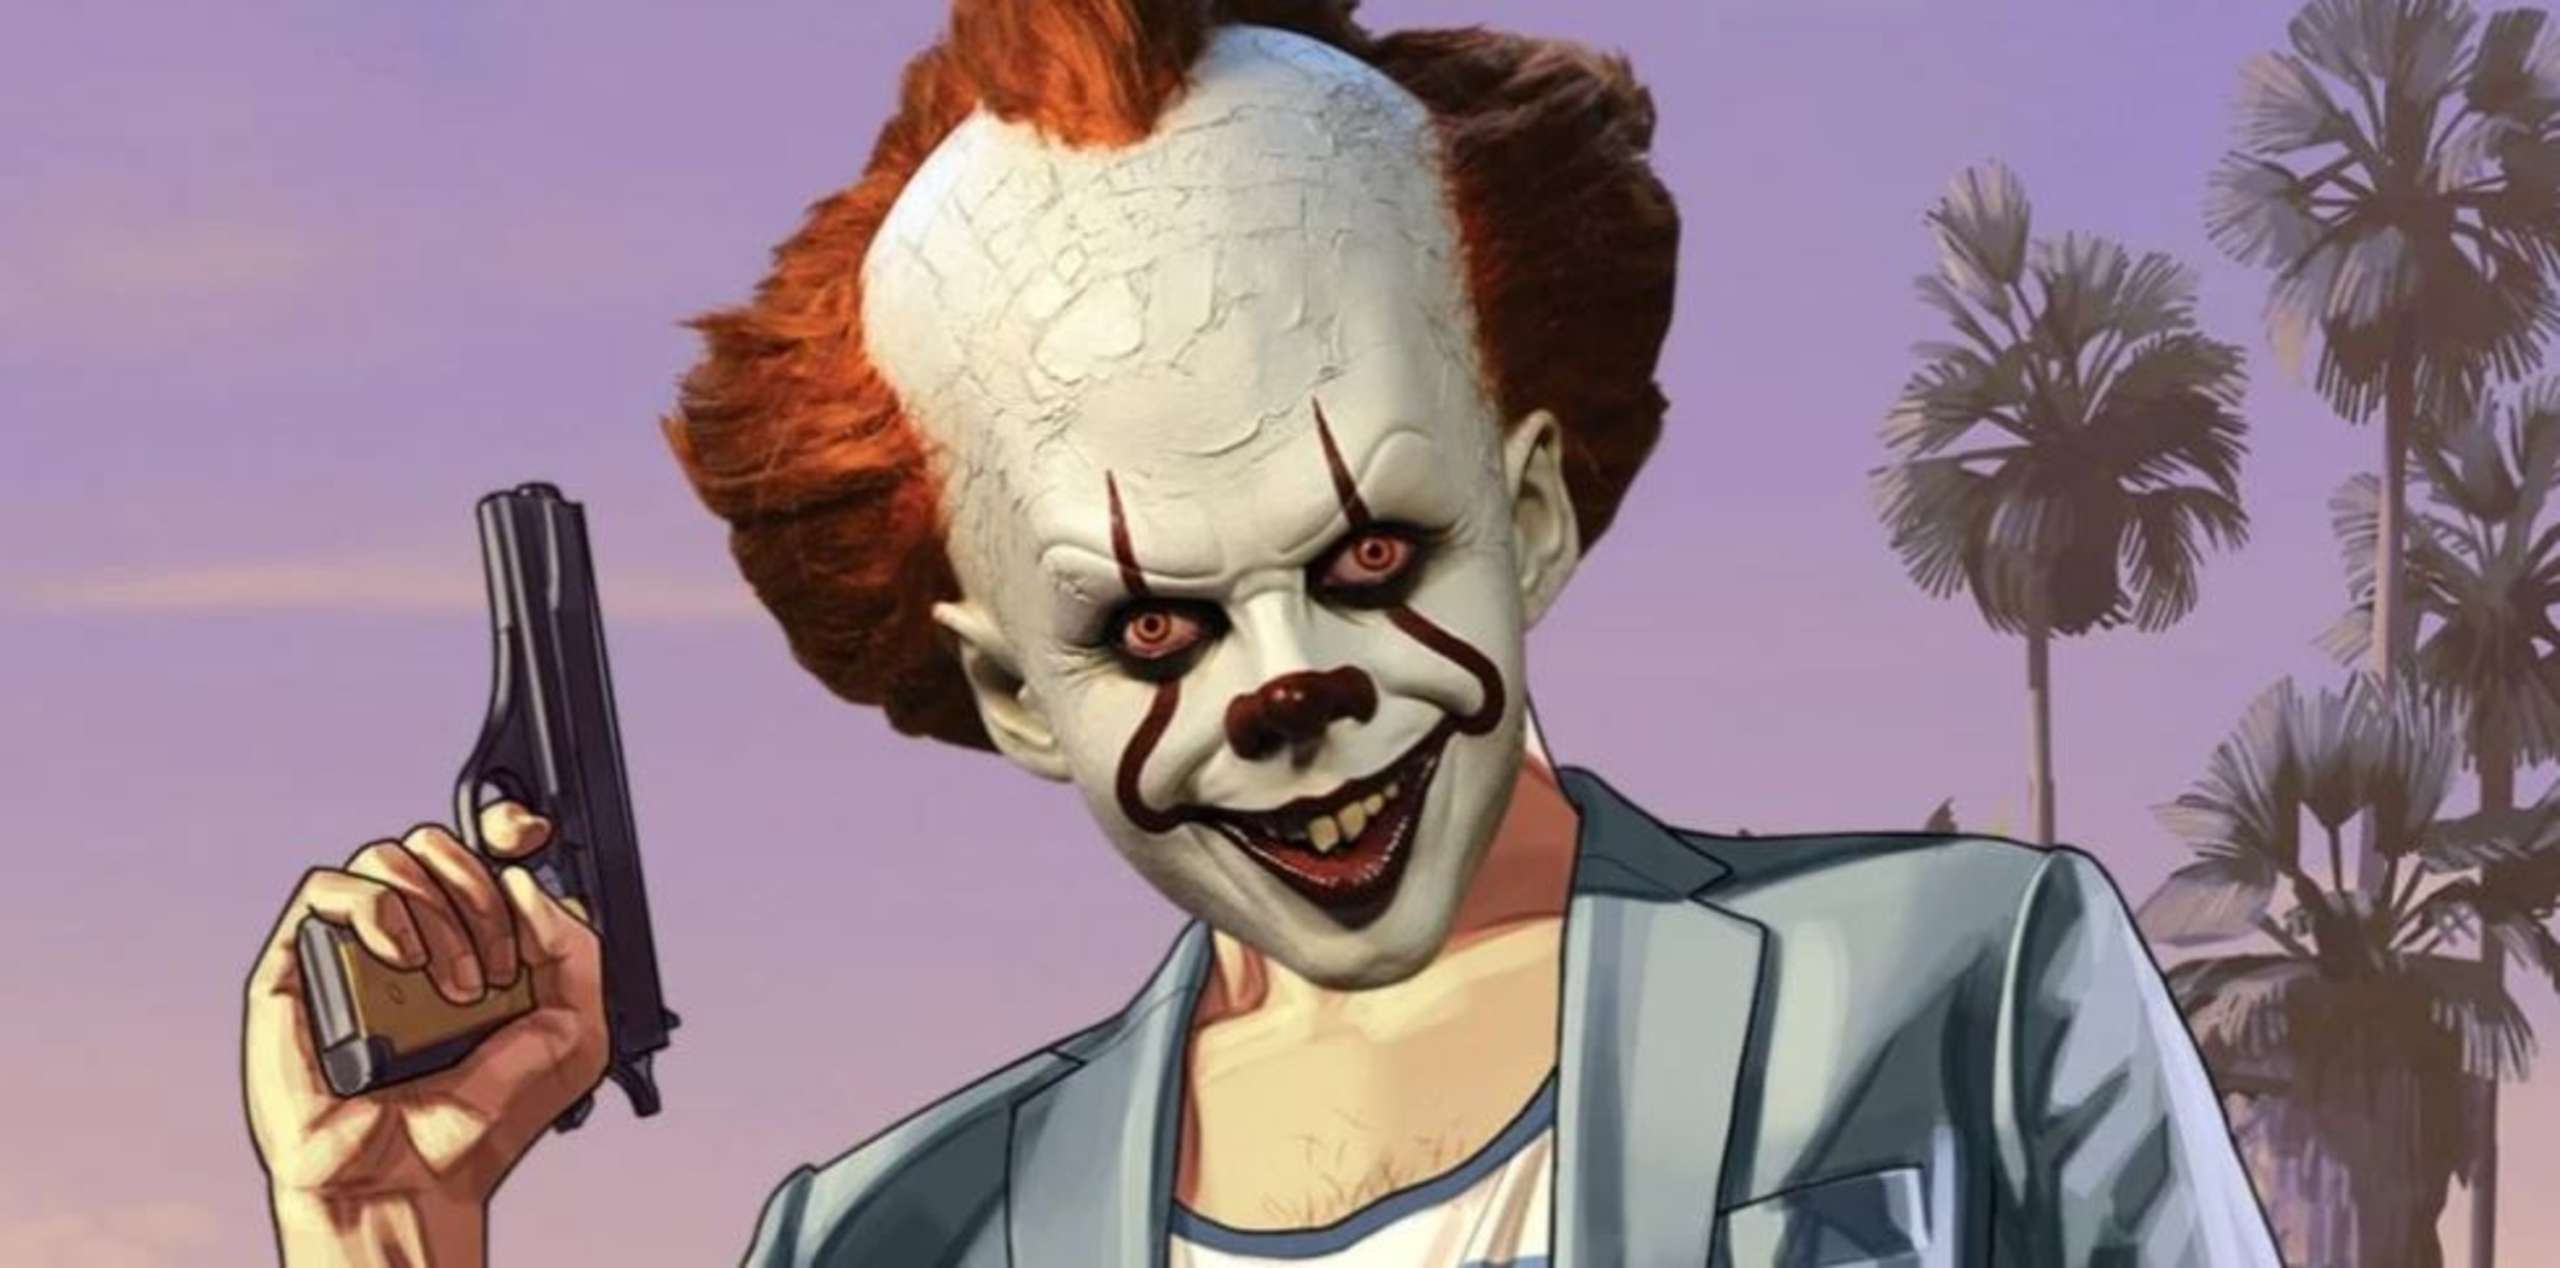 Strange Man Has Discovered Several Intriguing Easter Eggs And Mission Specifics In The Recent GTA 6 Leaks, Including One That Looks To Reference Pennywise